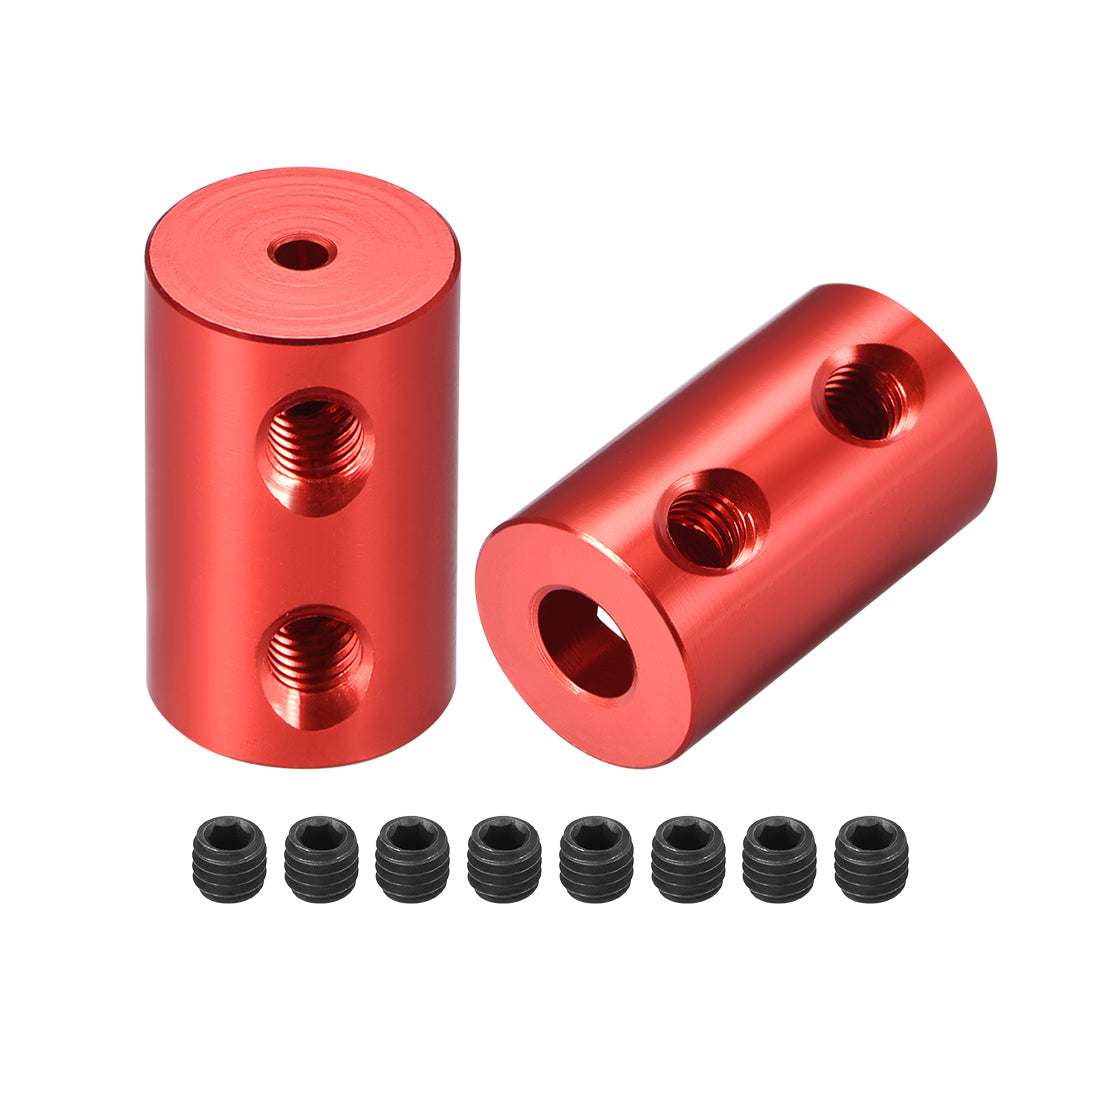 uxcell Uxcell Shaft Coupling 2mm to 5mm Bore L20xD12 Robot Motor Wheel Rigid Coupler Connector Red 2 Pcs